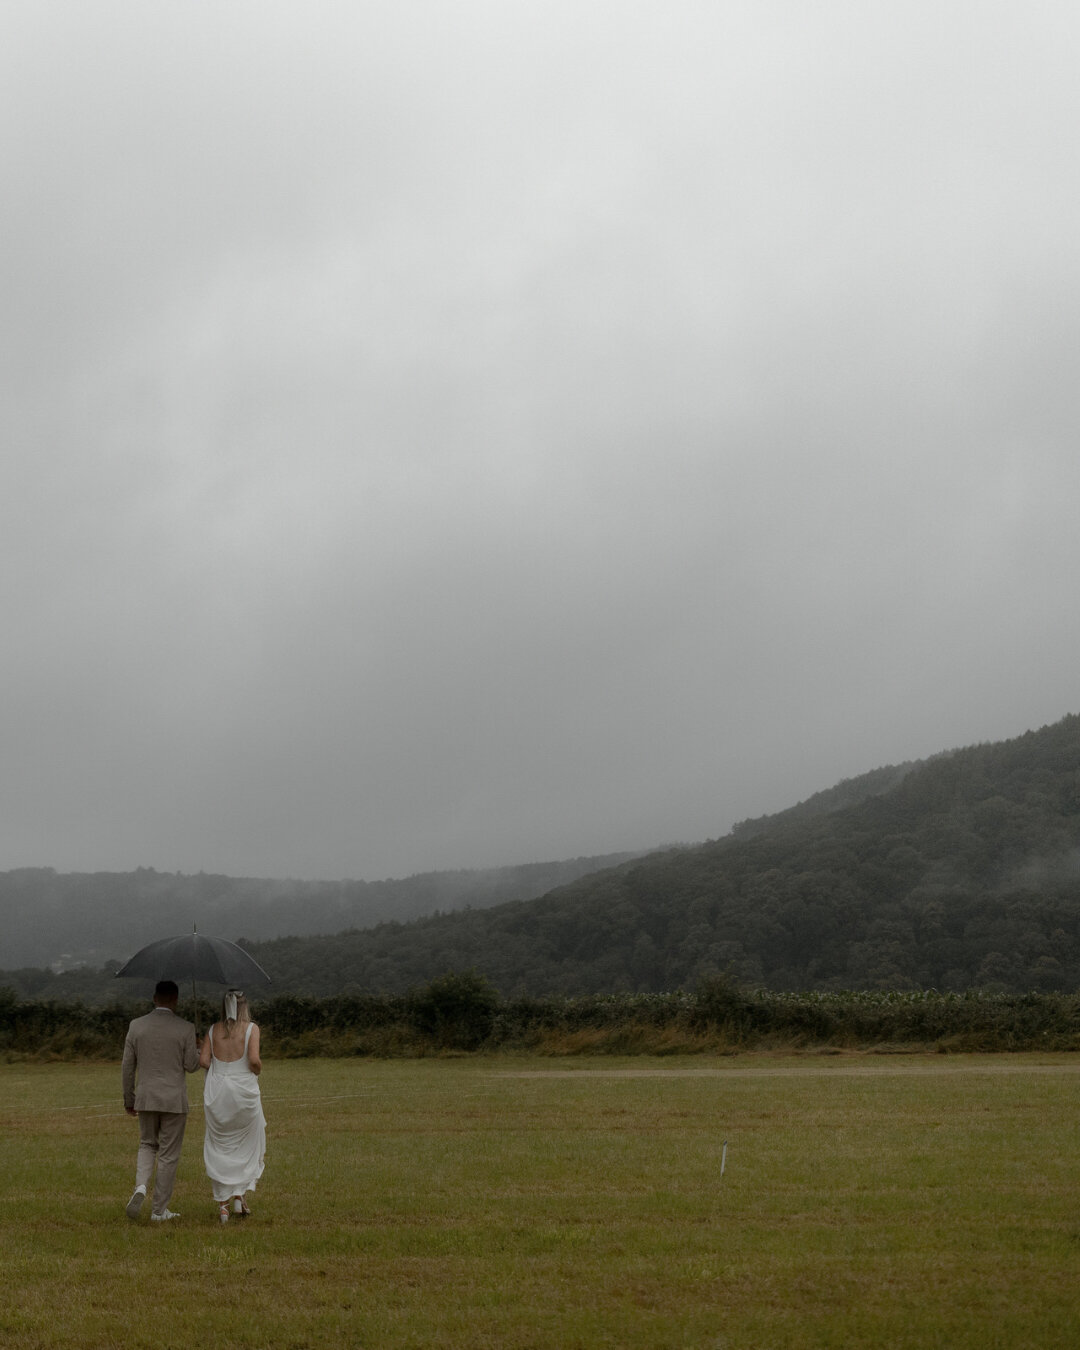 One thing we can always say is that the weather is predictably unpredictable and expecting rain is part of planning an English wedding! Thankfully, Emma &amp; Kai fully embraced the rain regardless of their plans for an outdoor festival wedding in th